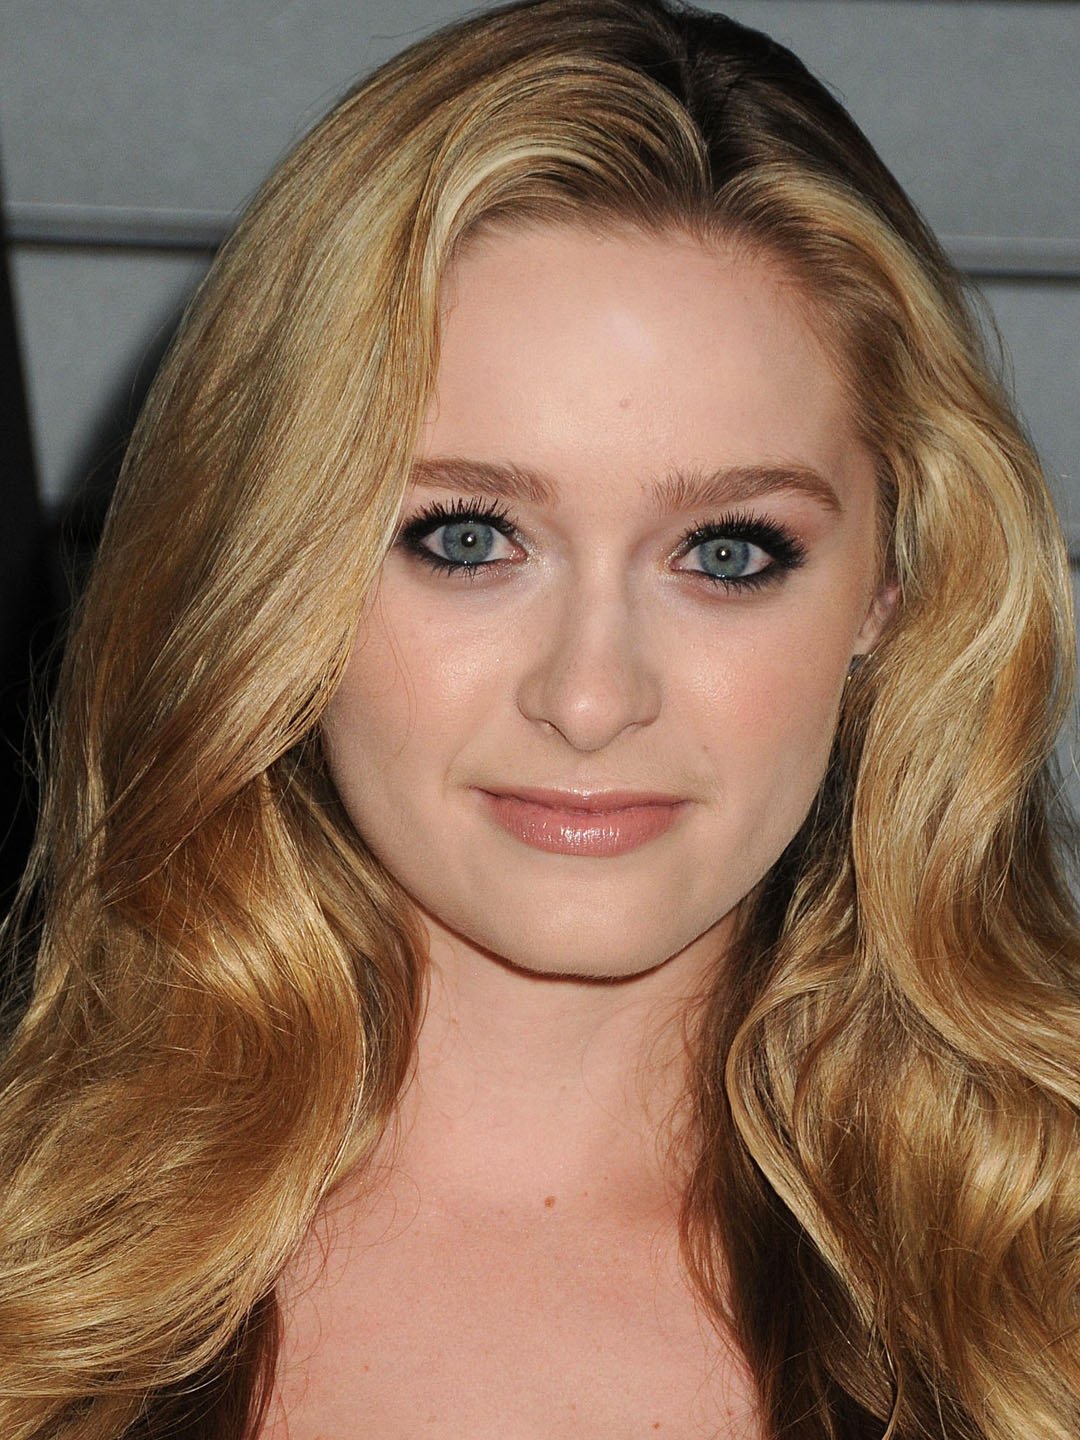 How tall is Greer Grammer?